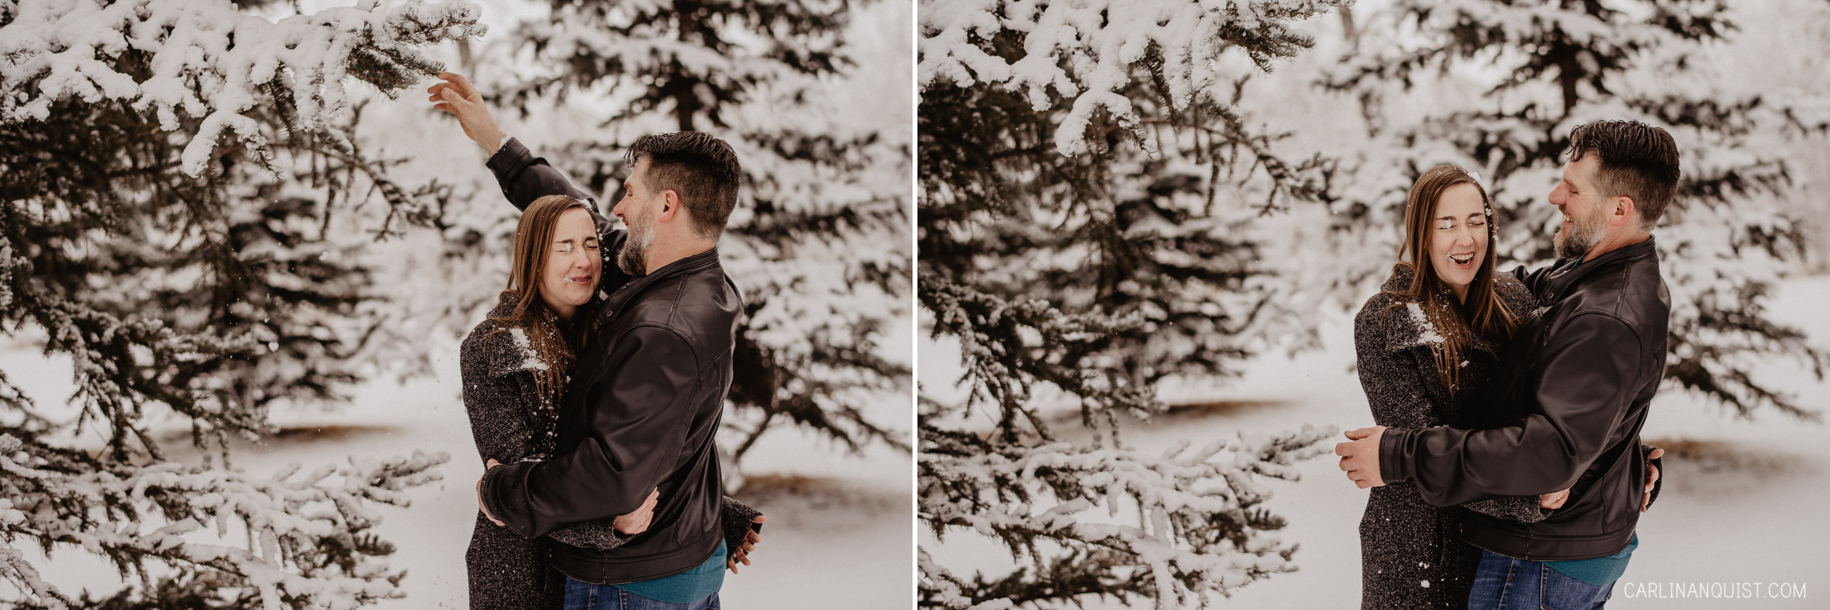 Engagement Photo Bloopers